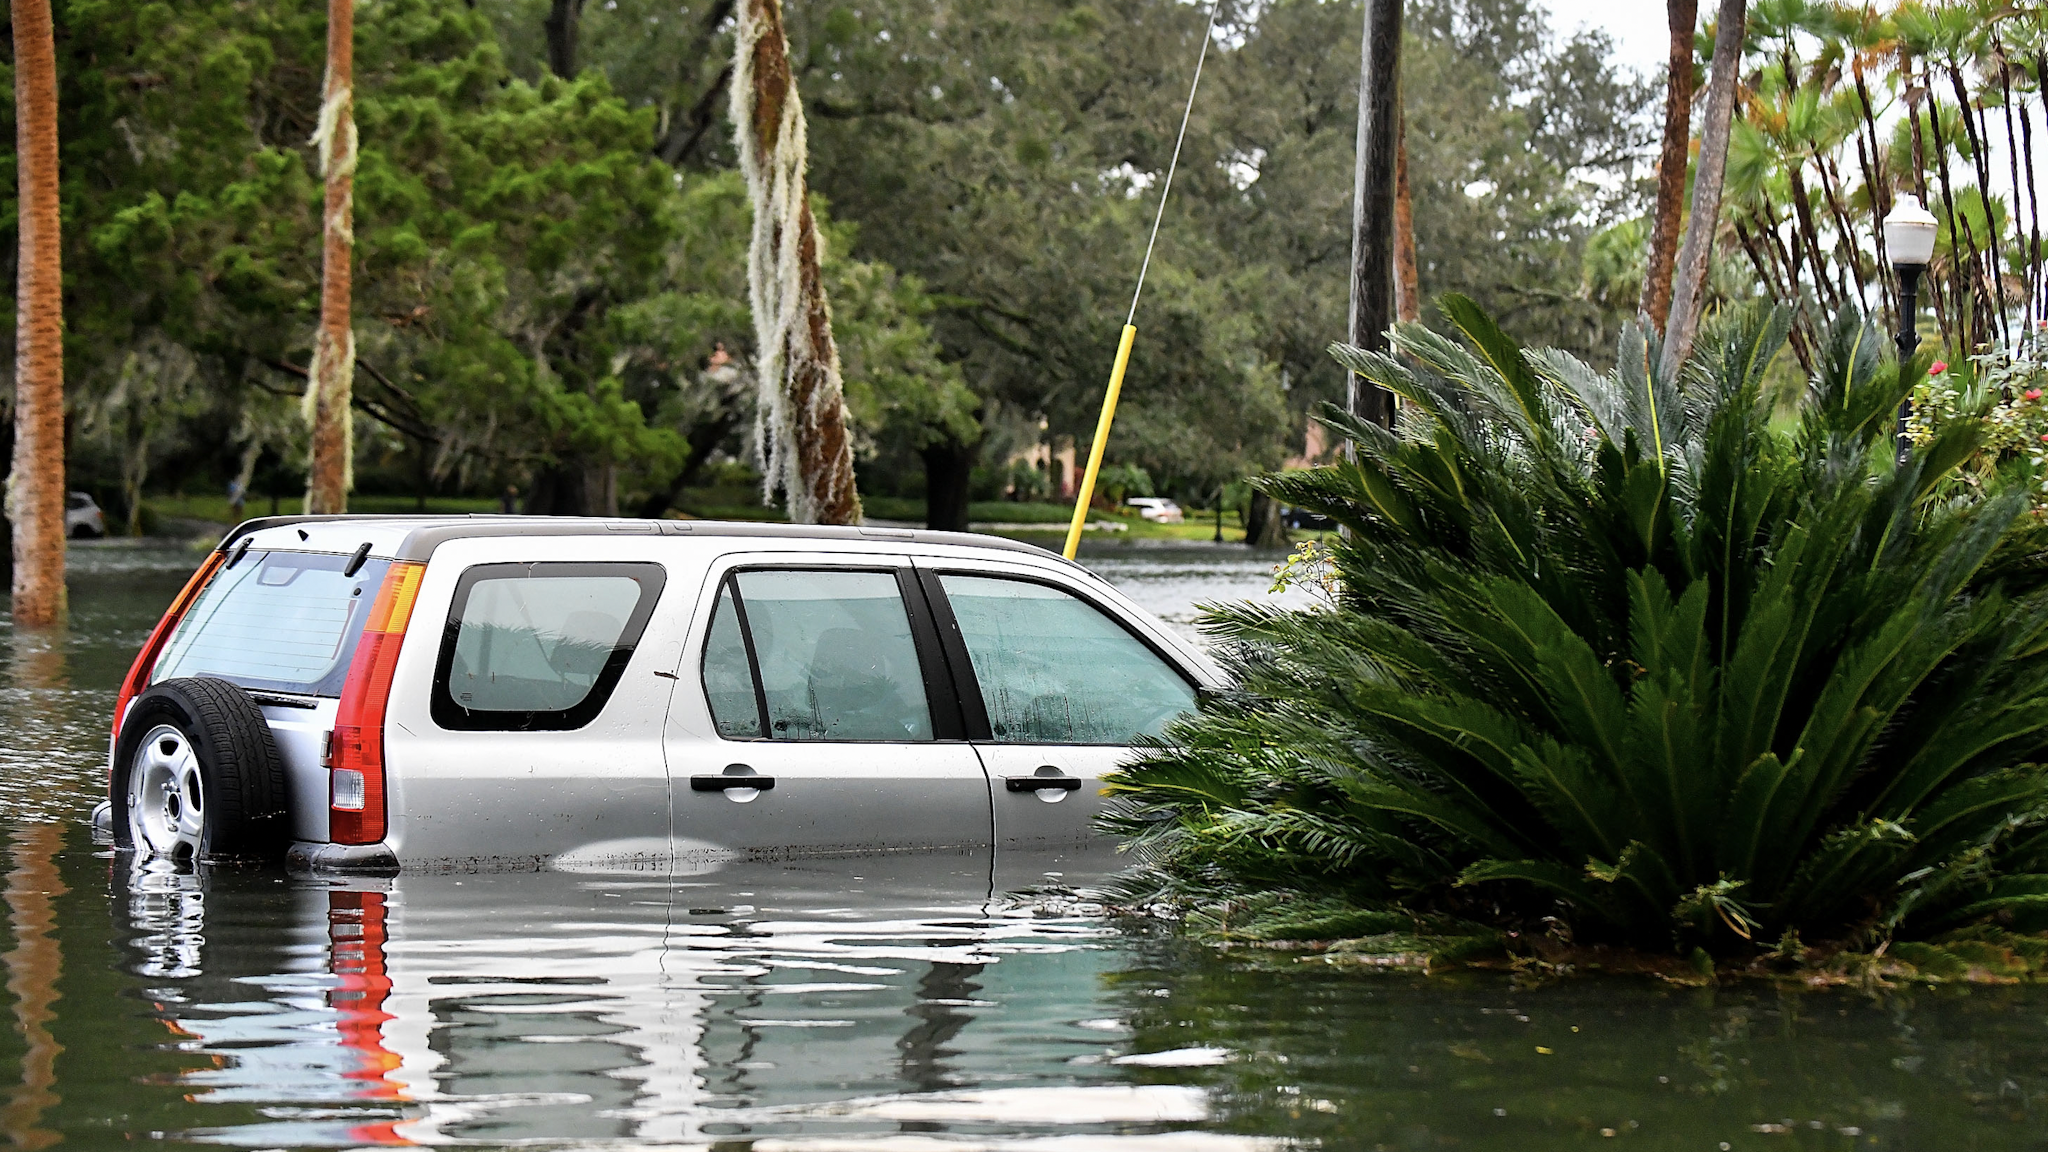 ORLANDO, FLORIDA - SEPTEMBER 29: A car sits in floodwater after Hurricane Ian on September 29, 2022 in Orlando, Florida. The hurricane brought high winds, storm surge and rain to the area causing severe damage.